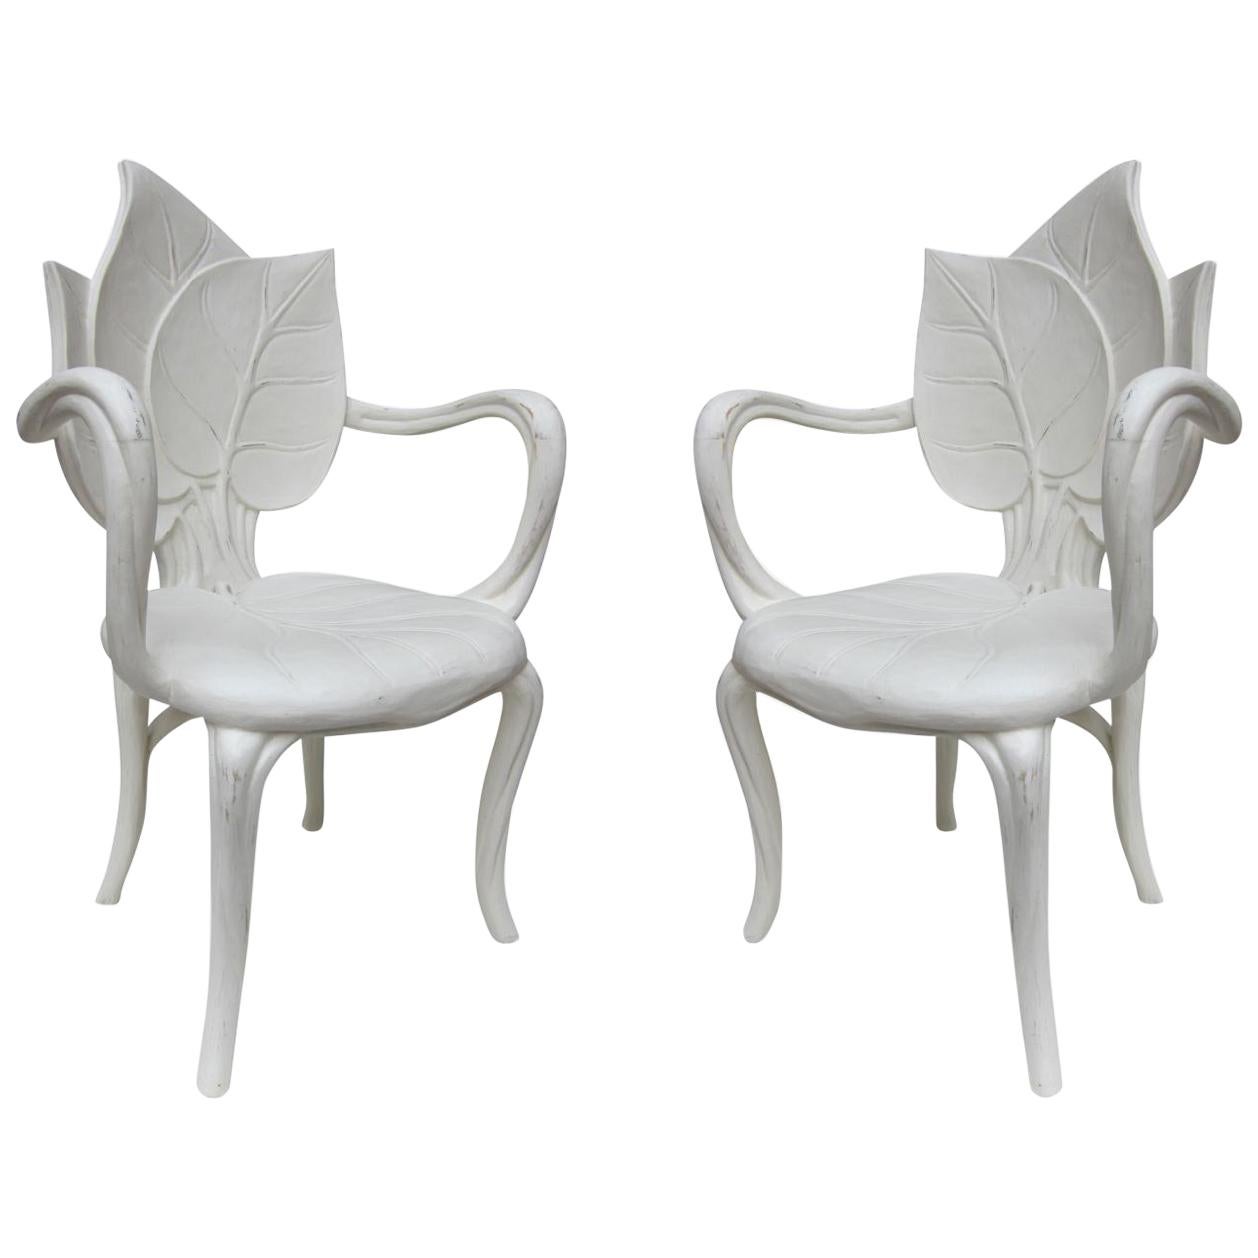 Pair of Carved Wood Palm Leaf Chairs Attributed to David Barrett, USA 1960 For Sale